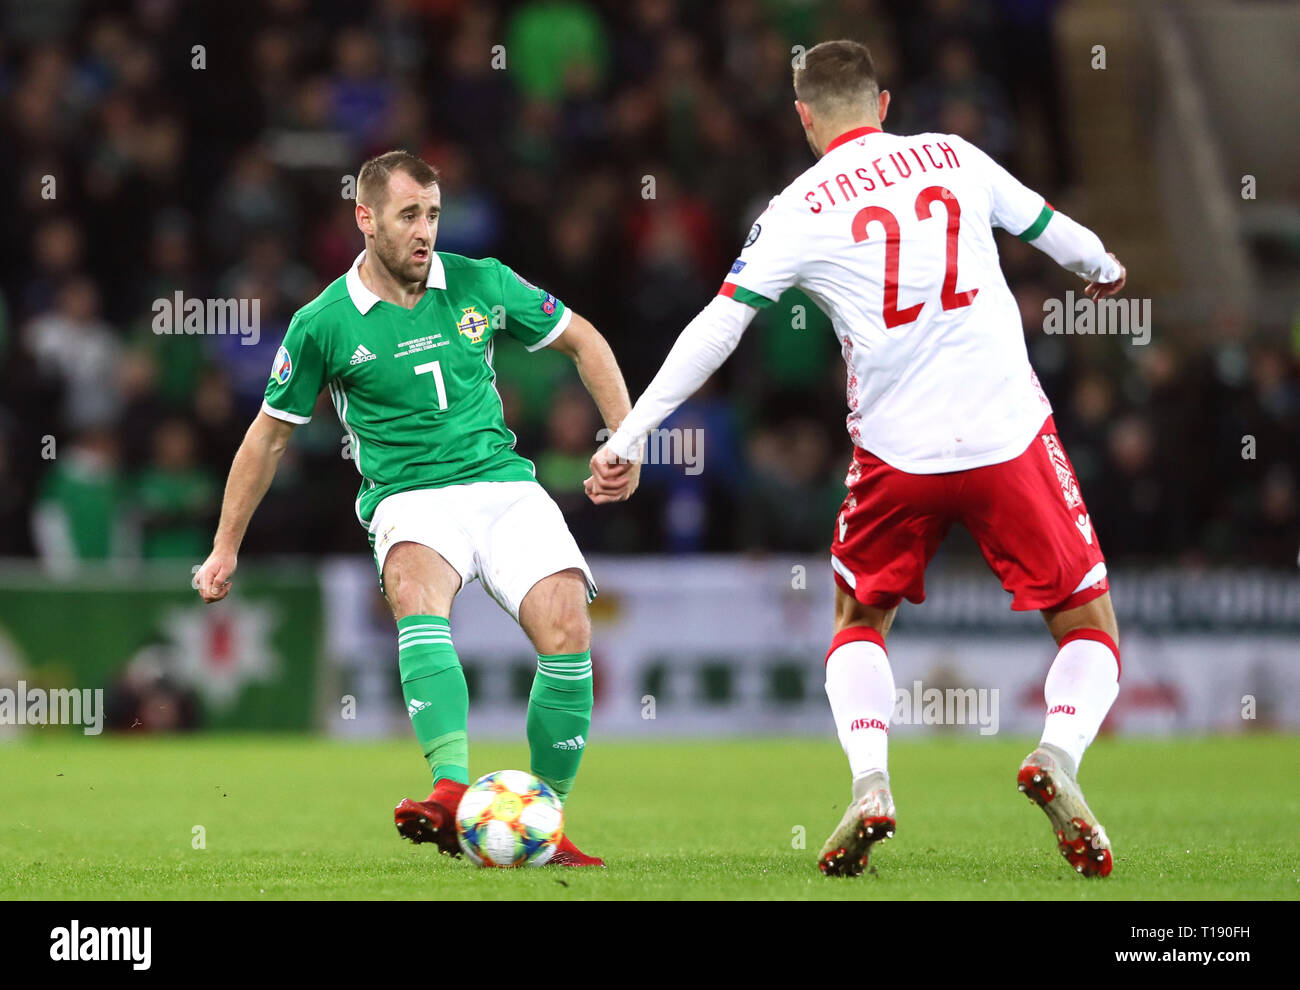 Northern Ireland's Niall McGinn (left) and Belarus' Ihar Stasevich battle for the ball during the UEFA Euro 2020 Qualifying, Group C match at Windsor Park, Belfast. Stock Photo